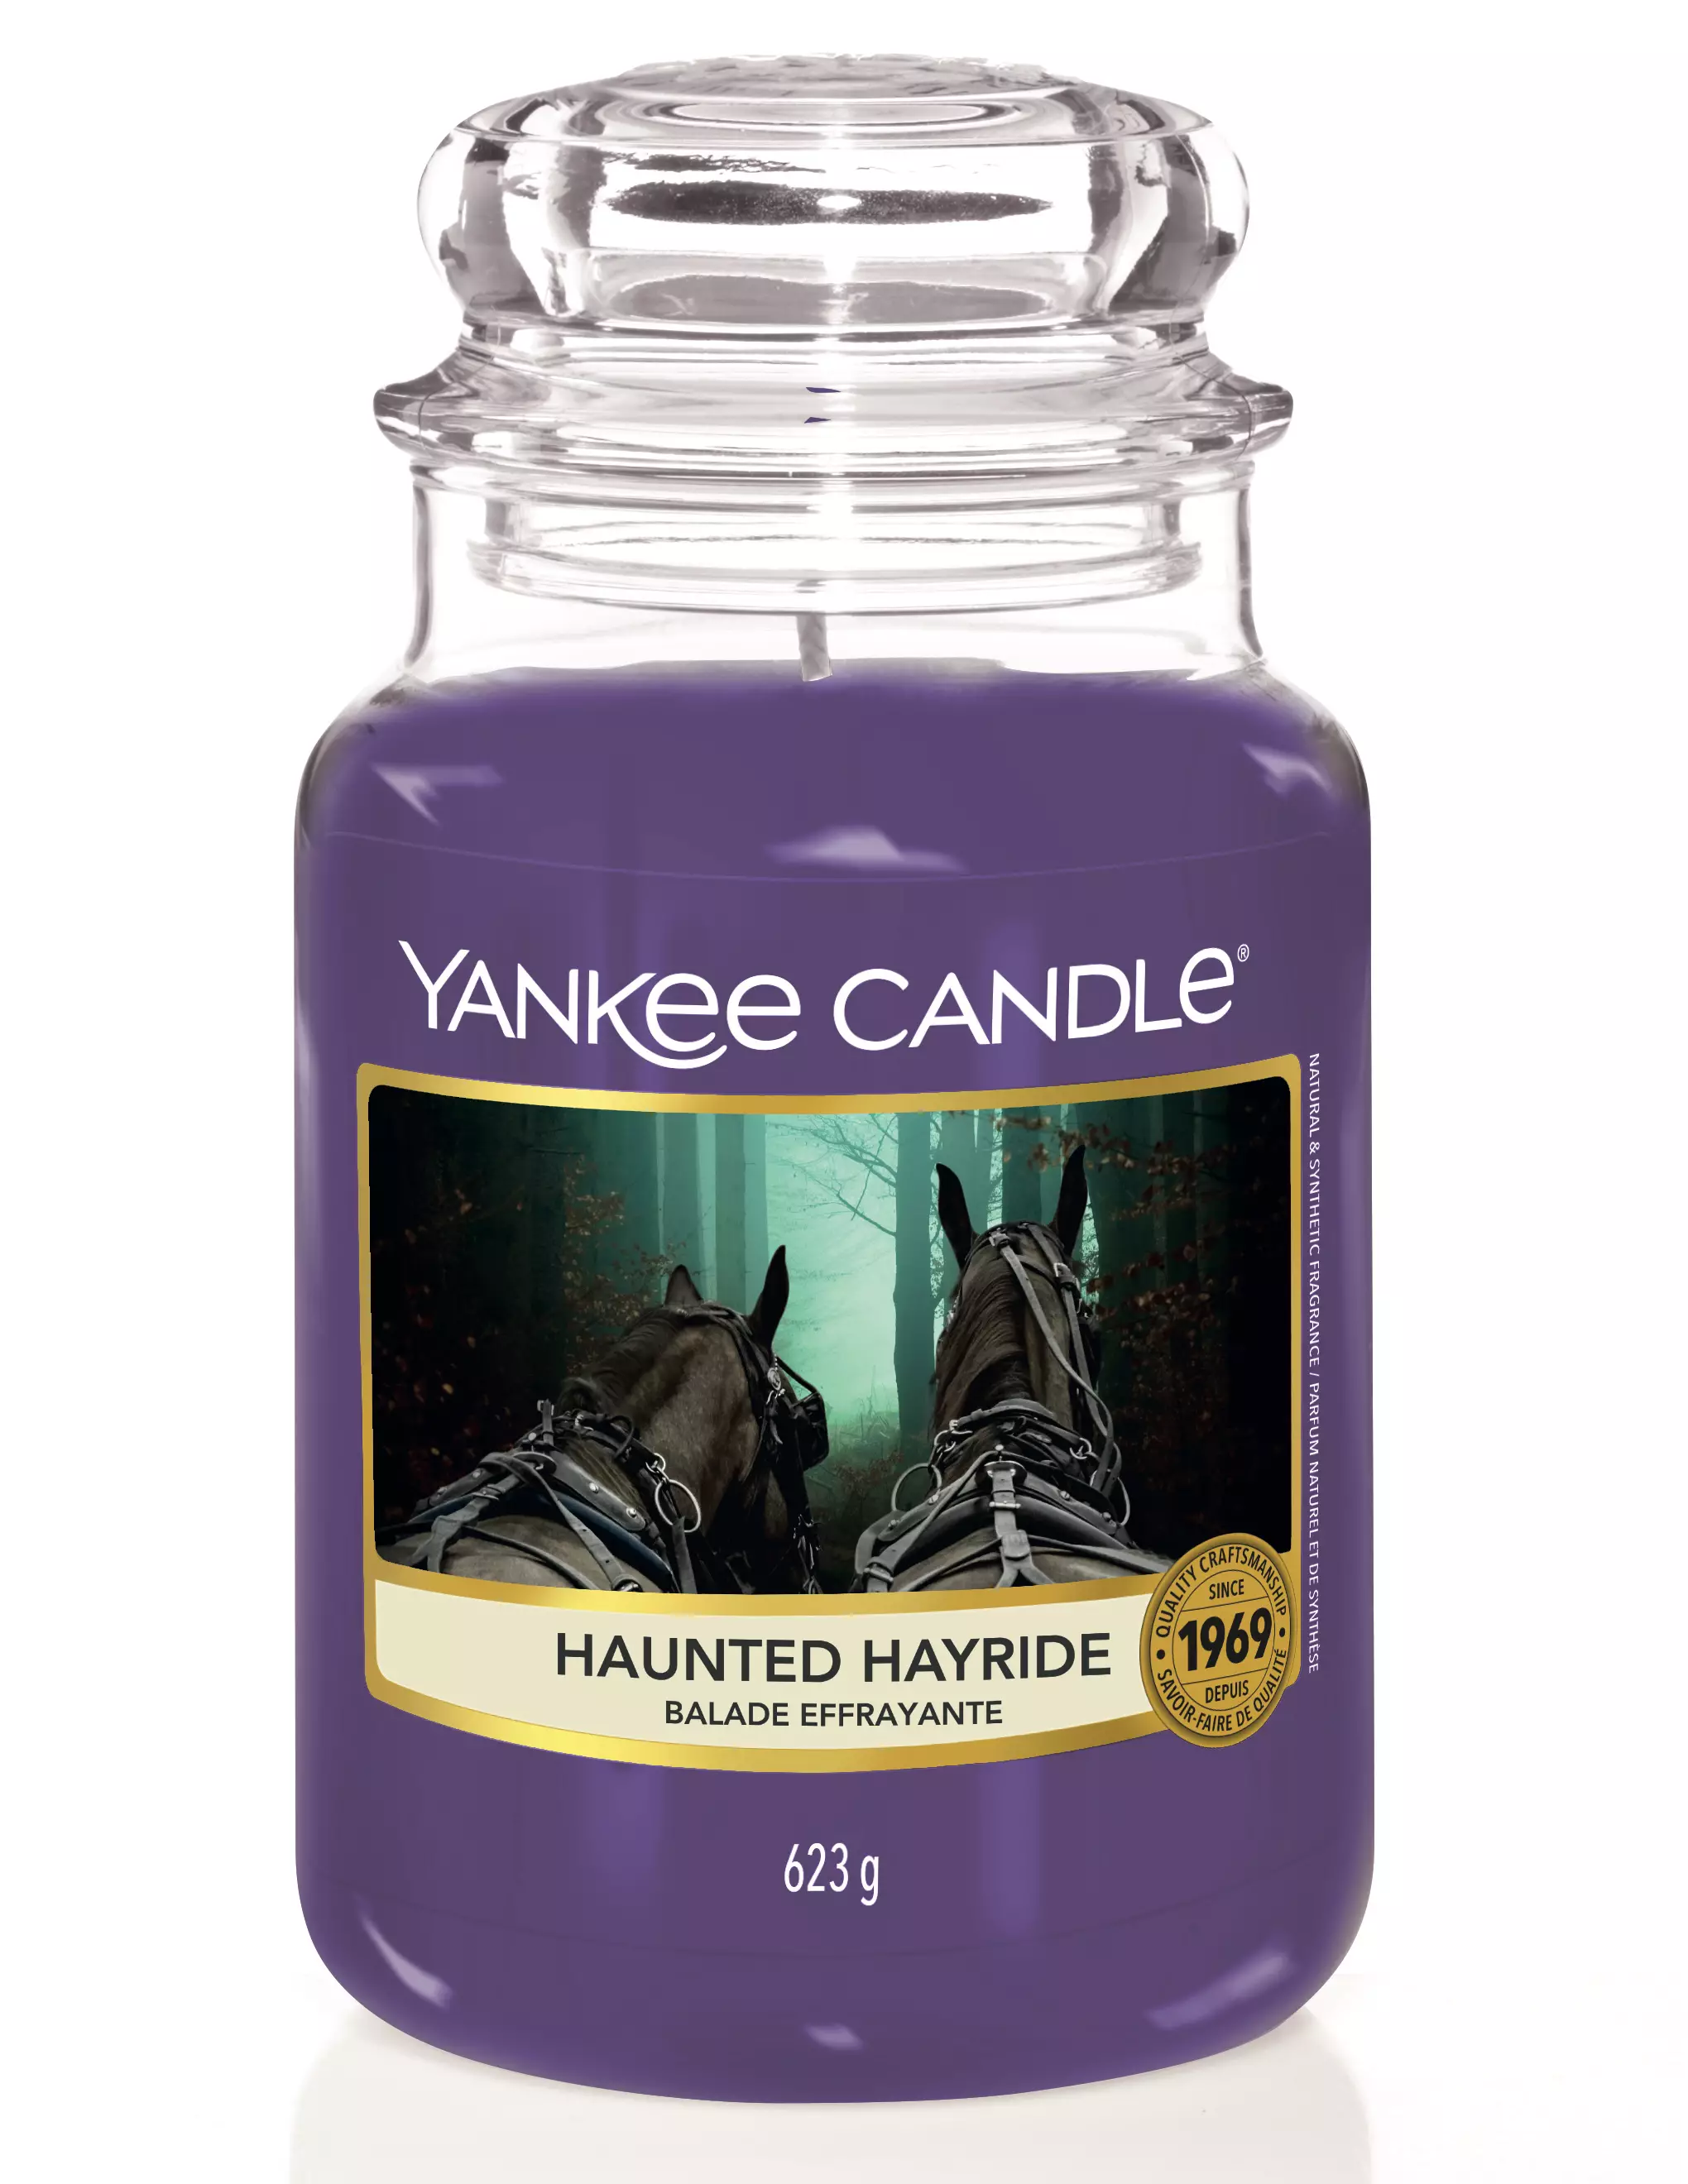 'Haunted Hayride', a haunting aromatic scent with woody notes